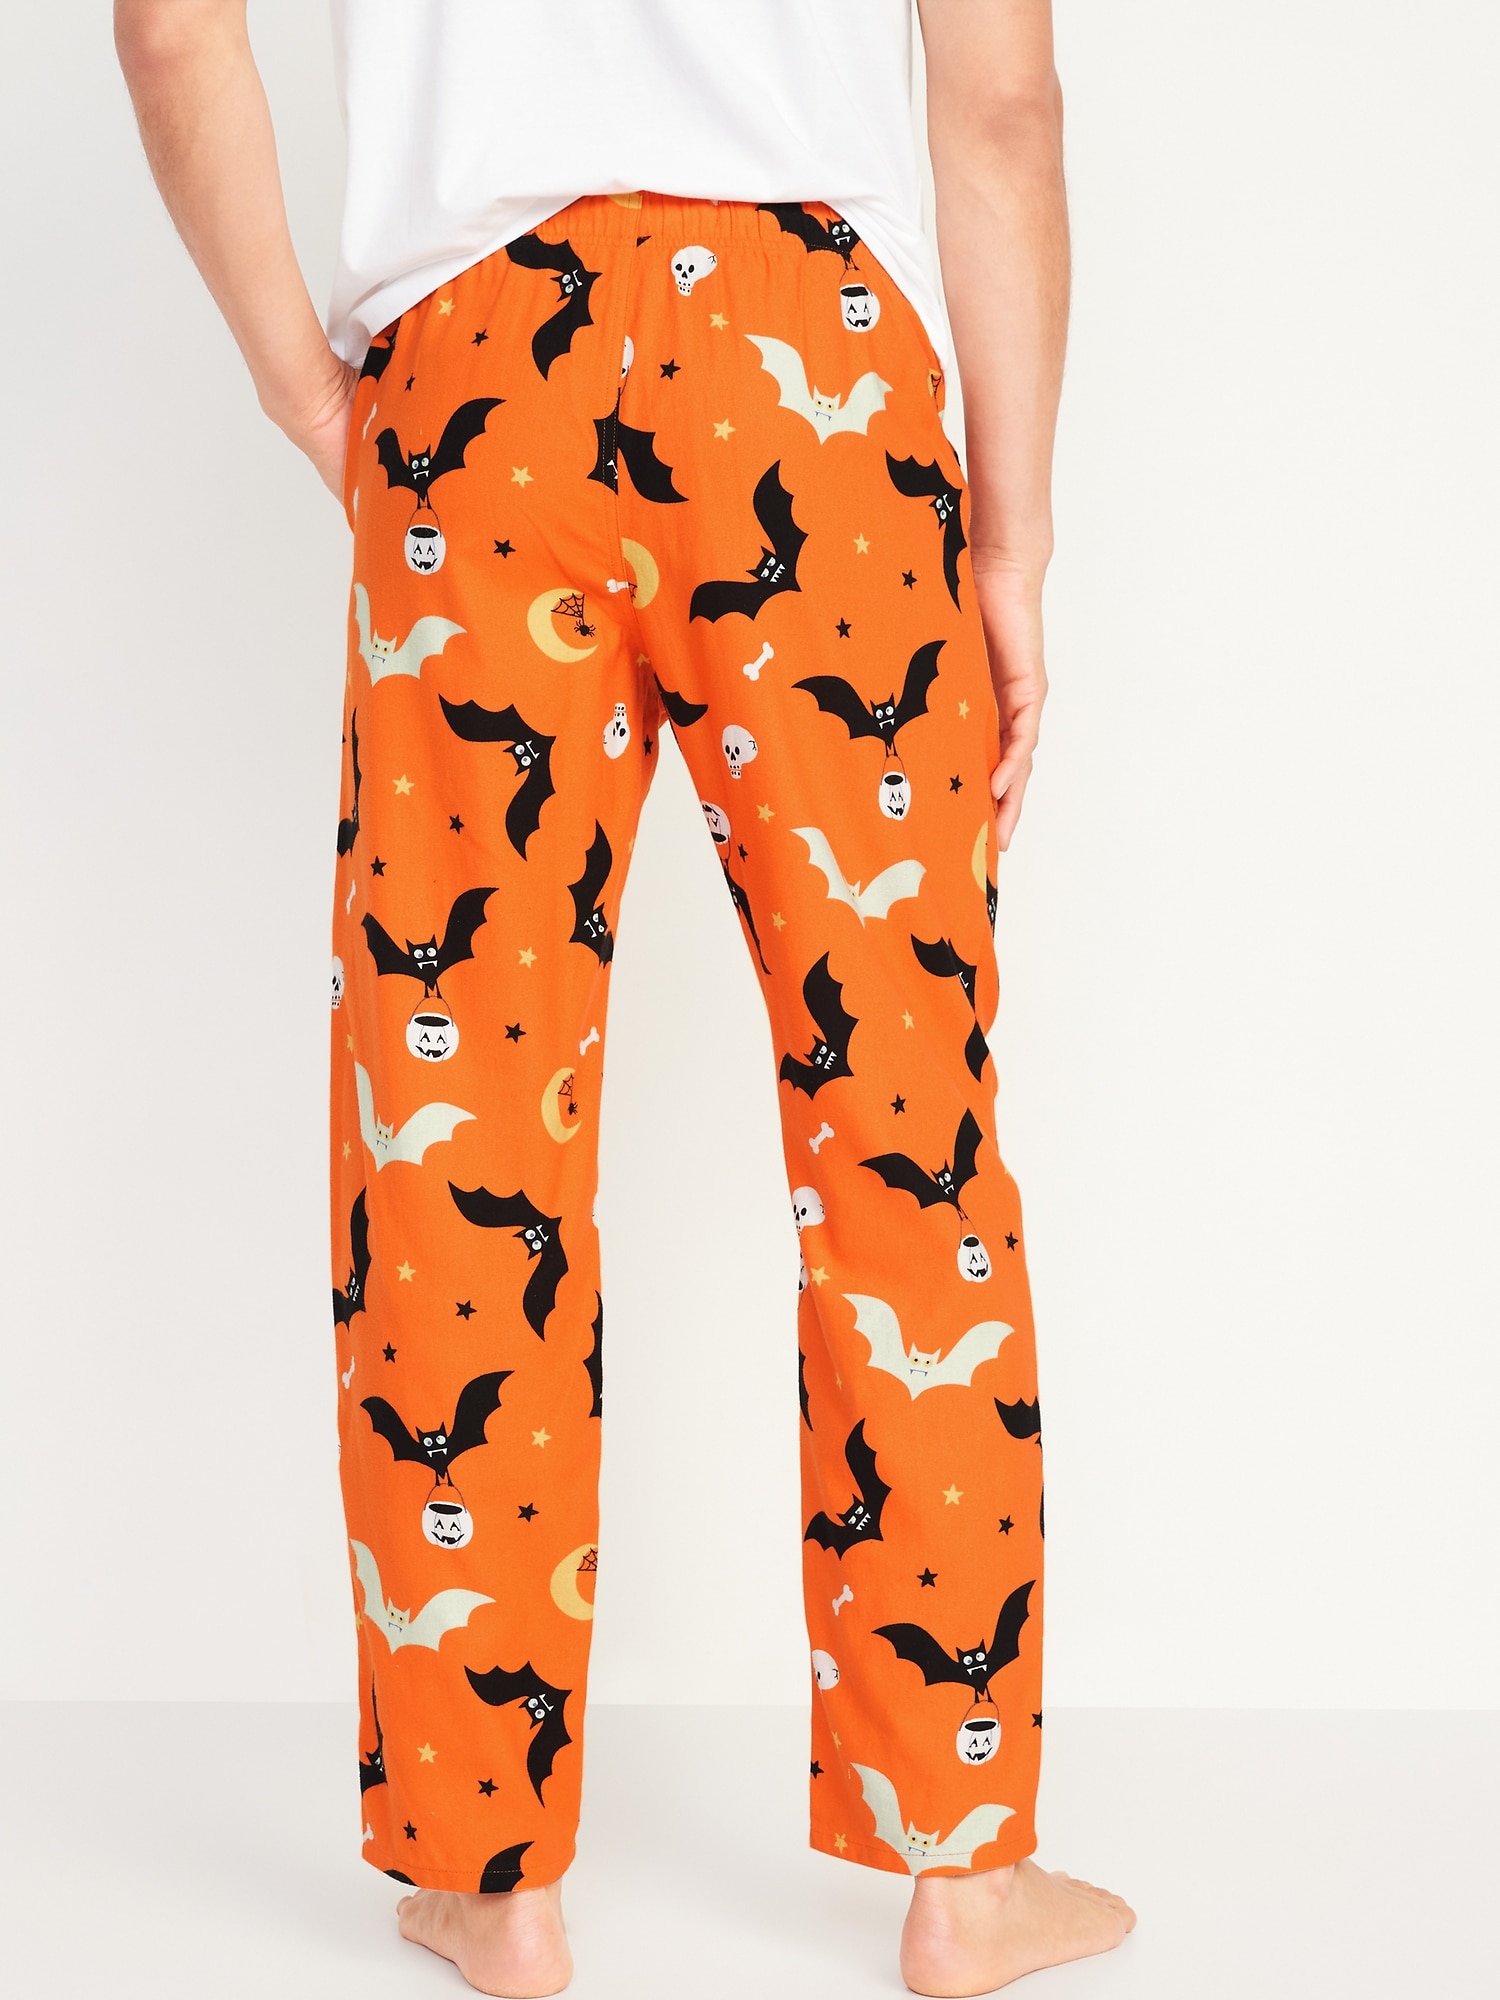 Matching Halloween Flannel Pajama Pants for Men | Old Navy